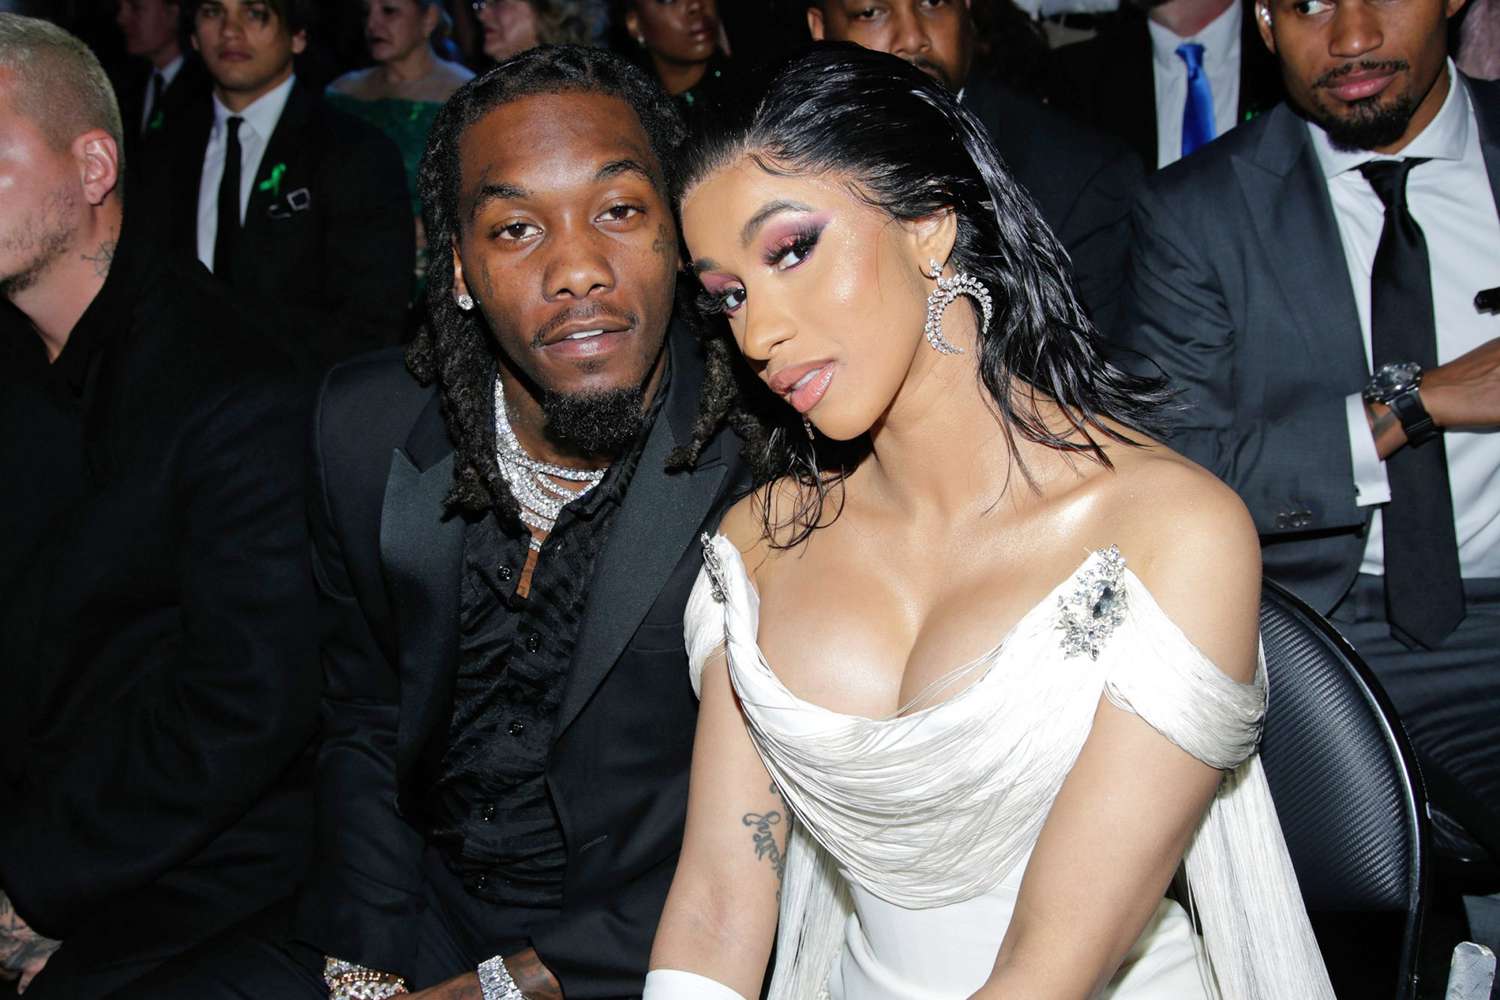 Cardi B And Offset Reunite For Valentine’s Day Date In Miami